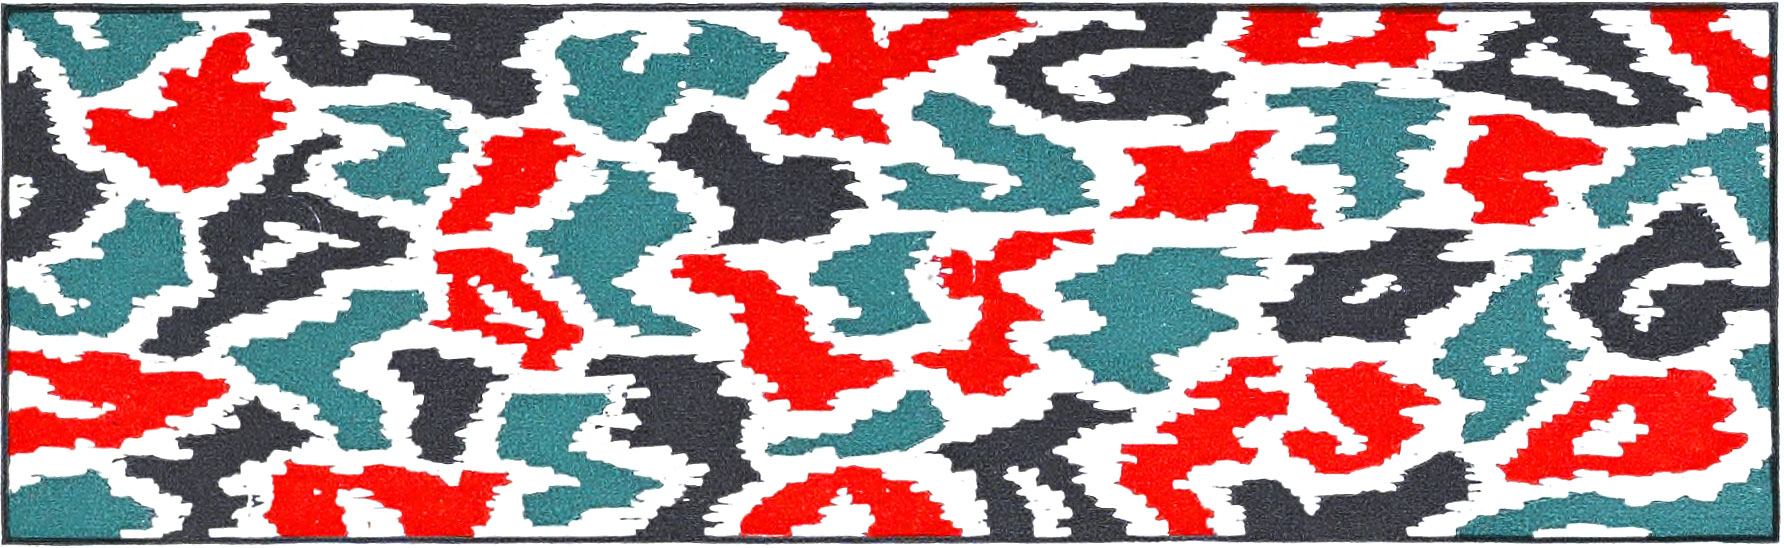 Camouflage-like pattern of red, dark sea-green, and black